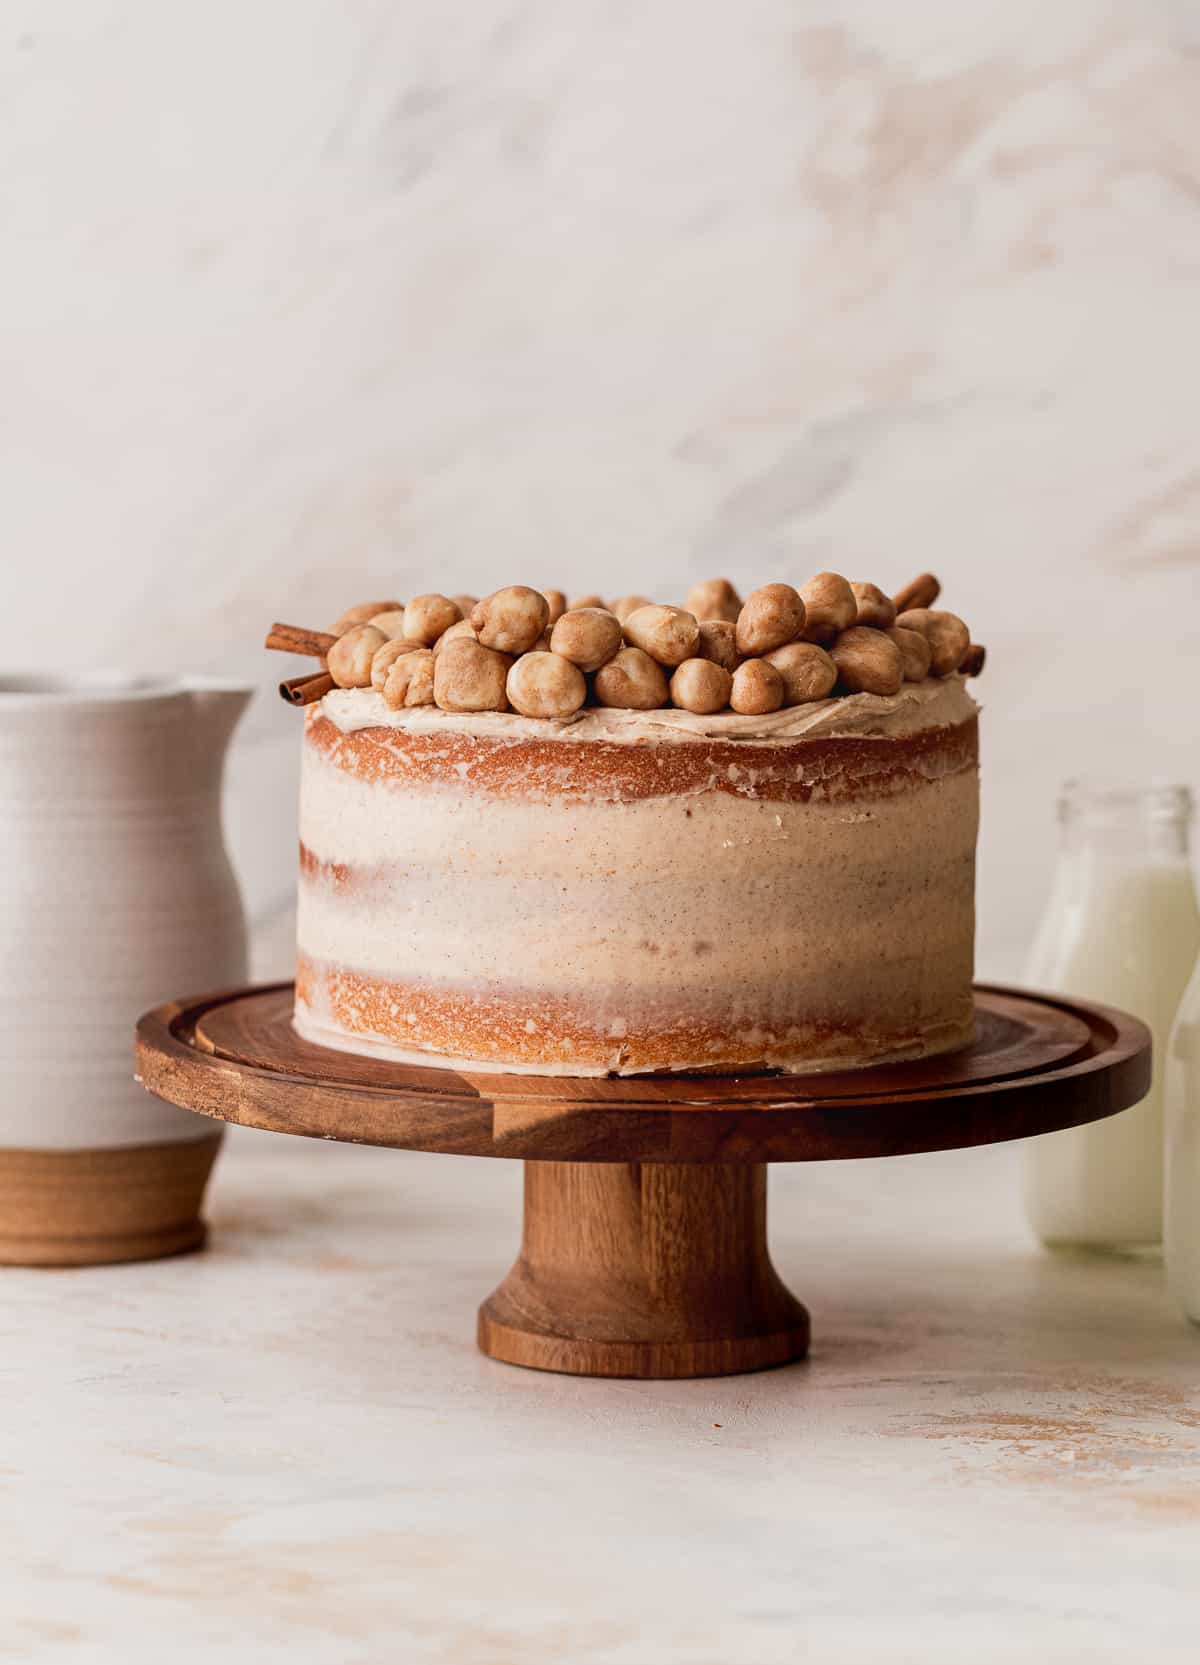 Snickerdoodle cake on a cake stand.